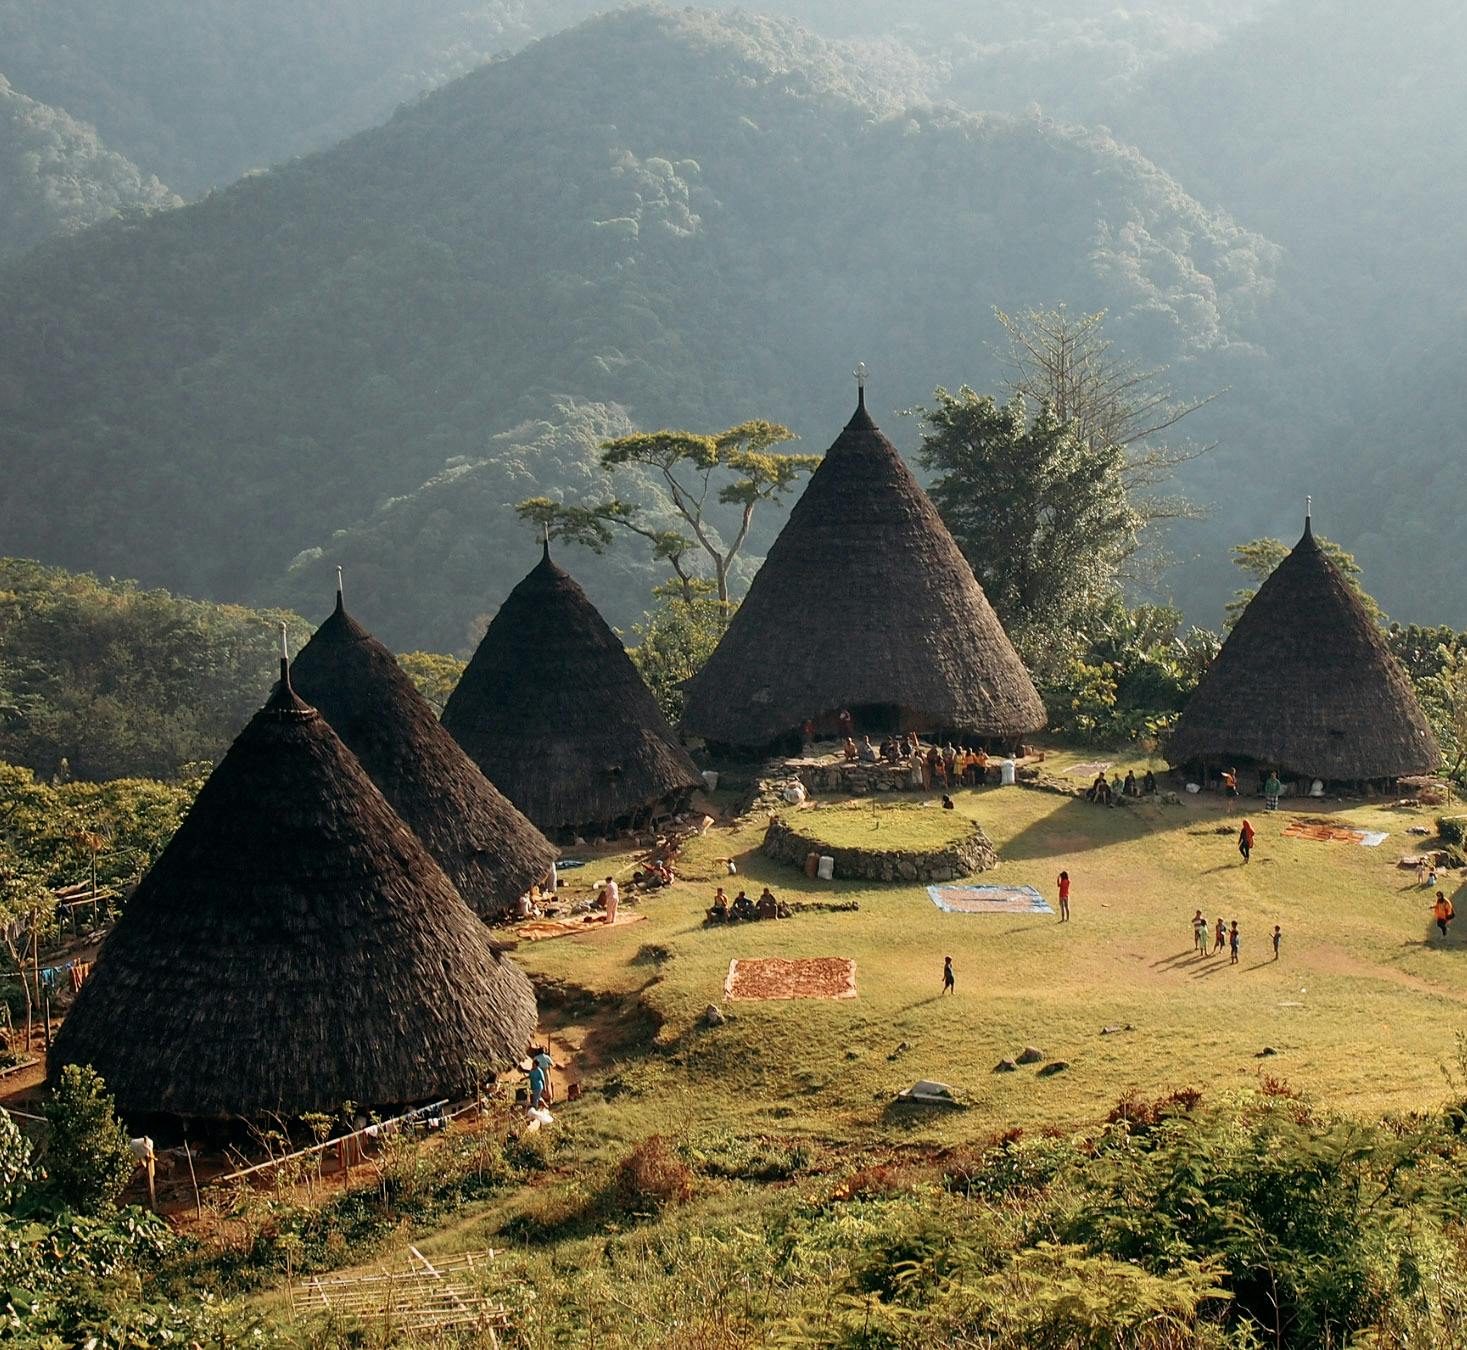 Go back in time to visit remote Wae Rebo, a gorgeous traditional village not accessible by roads. 